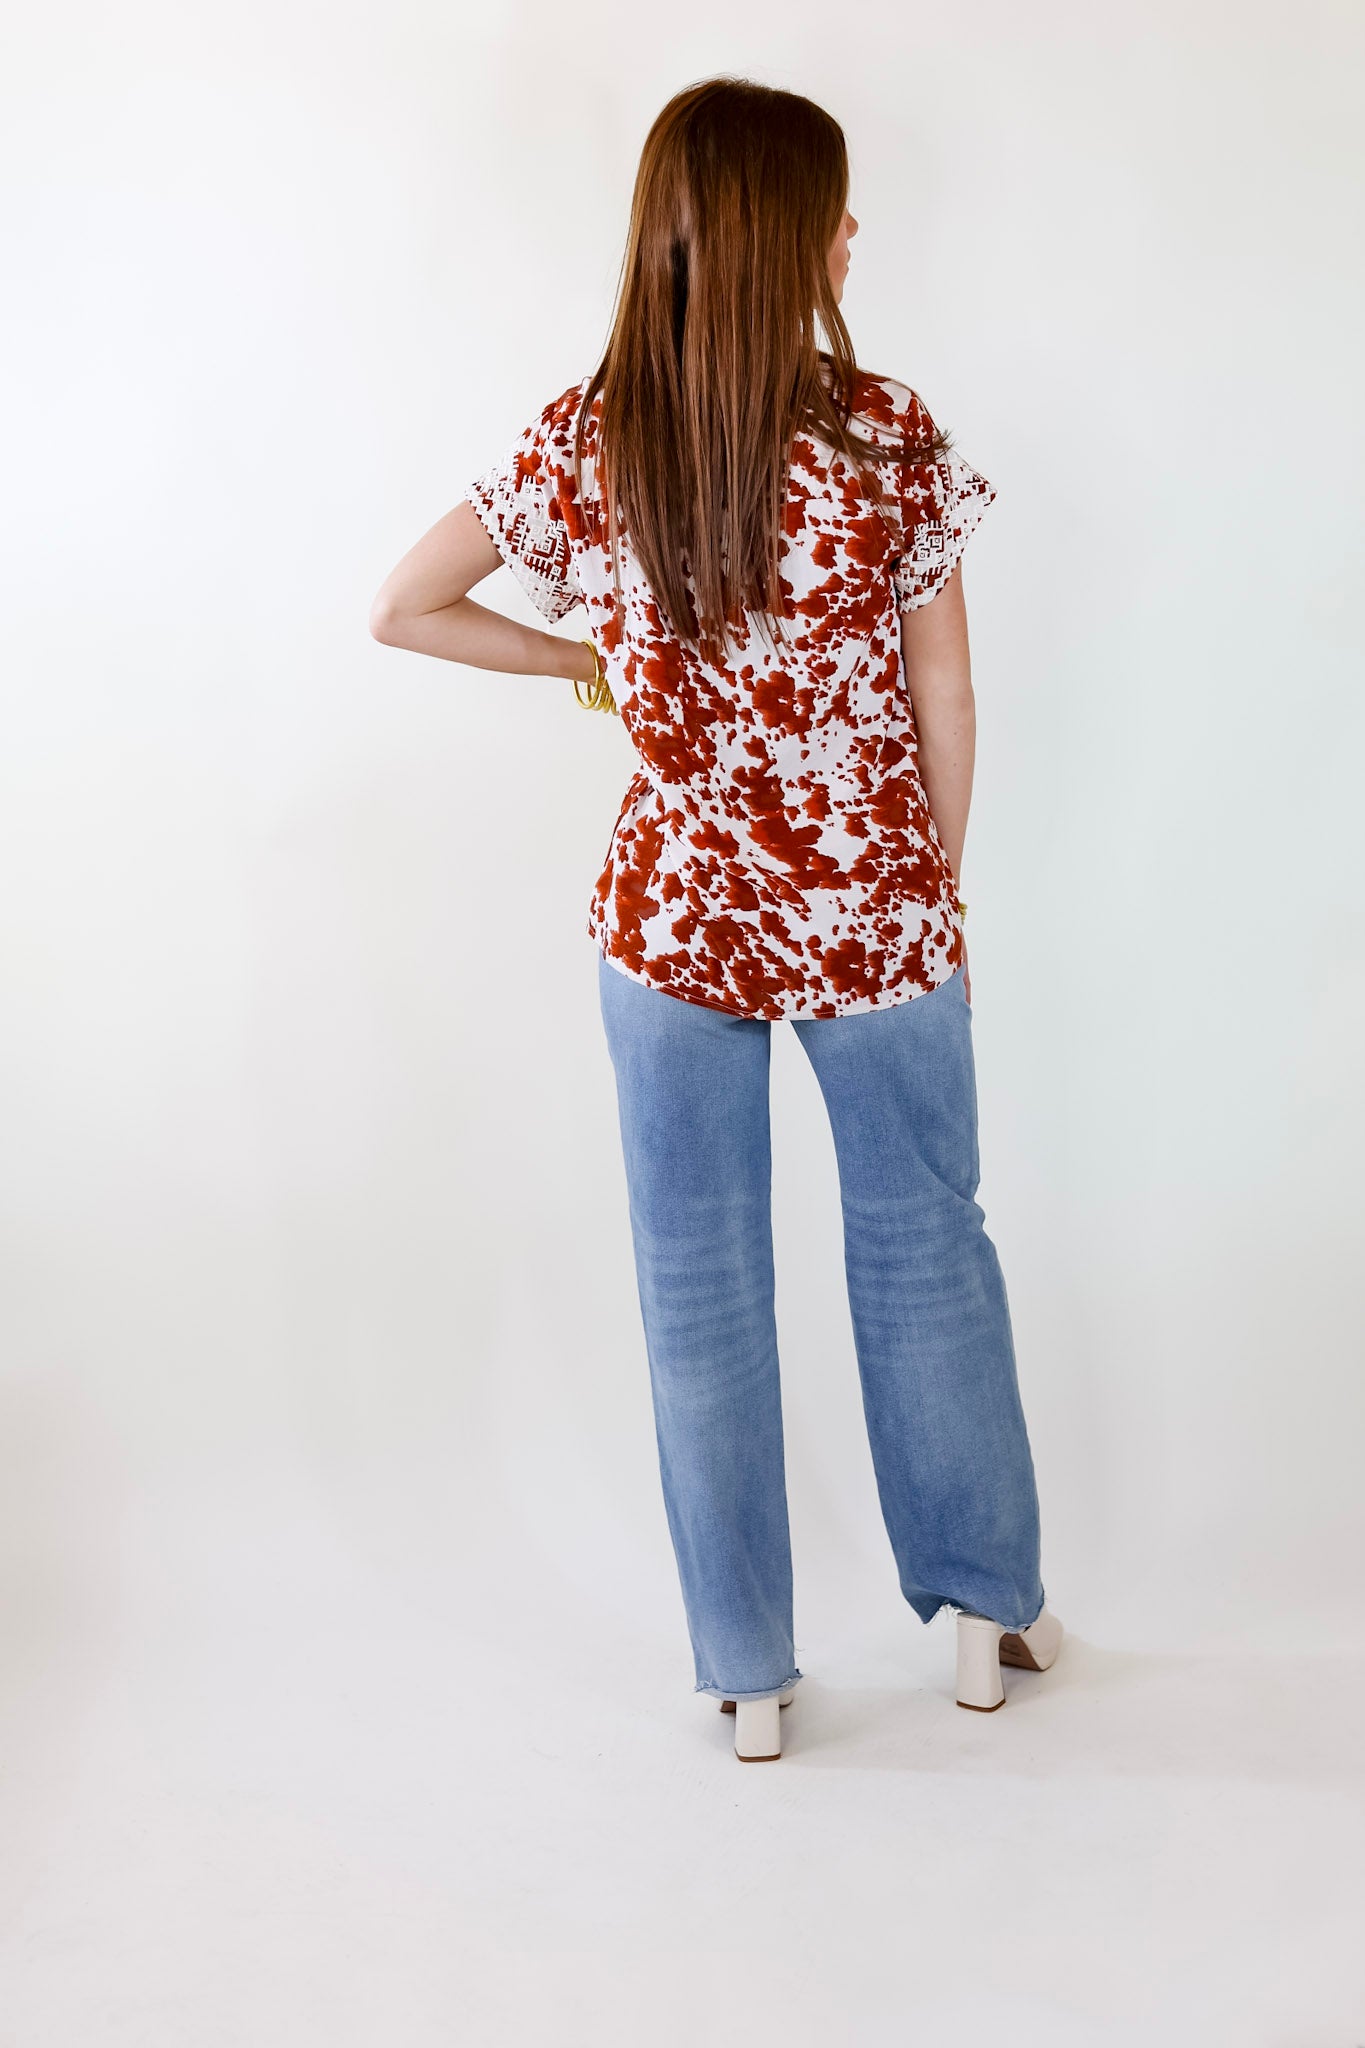 Hear The Applause Embroidered Top in White and Rust Orange - Giddy Up Glamour Boutique